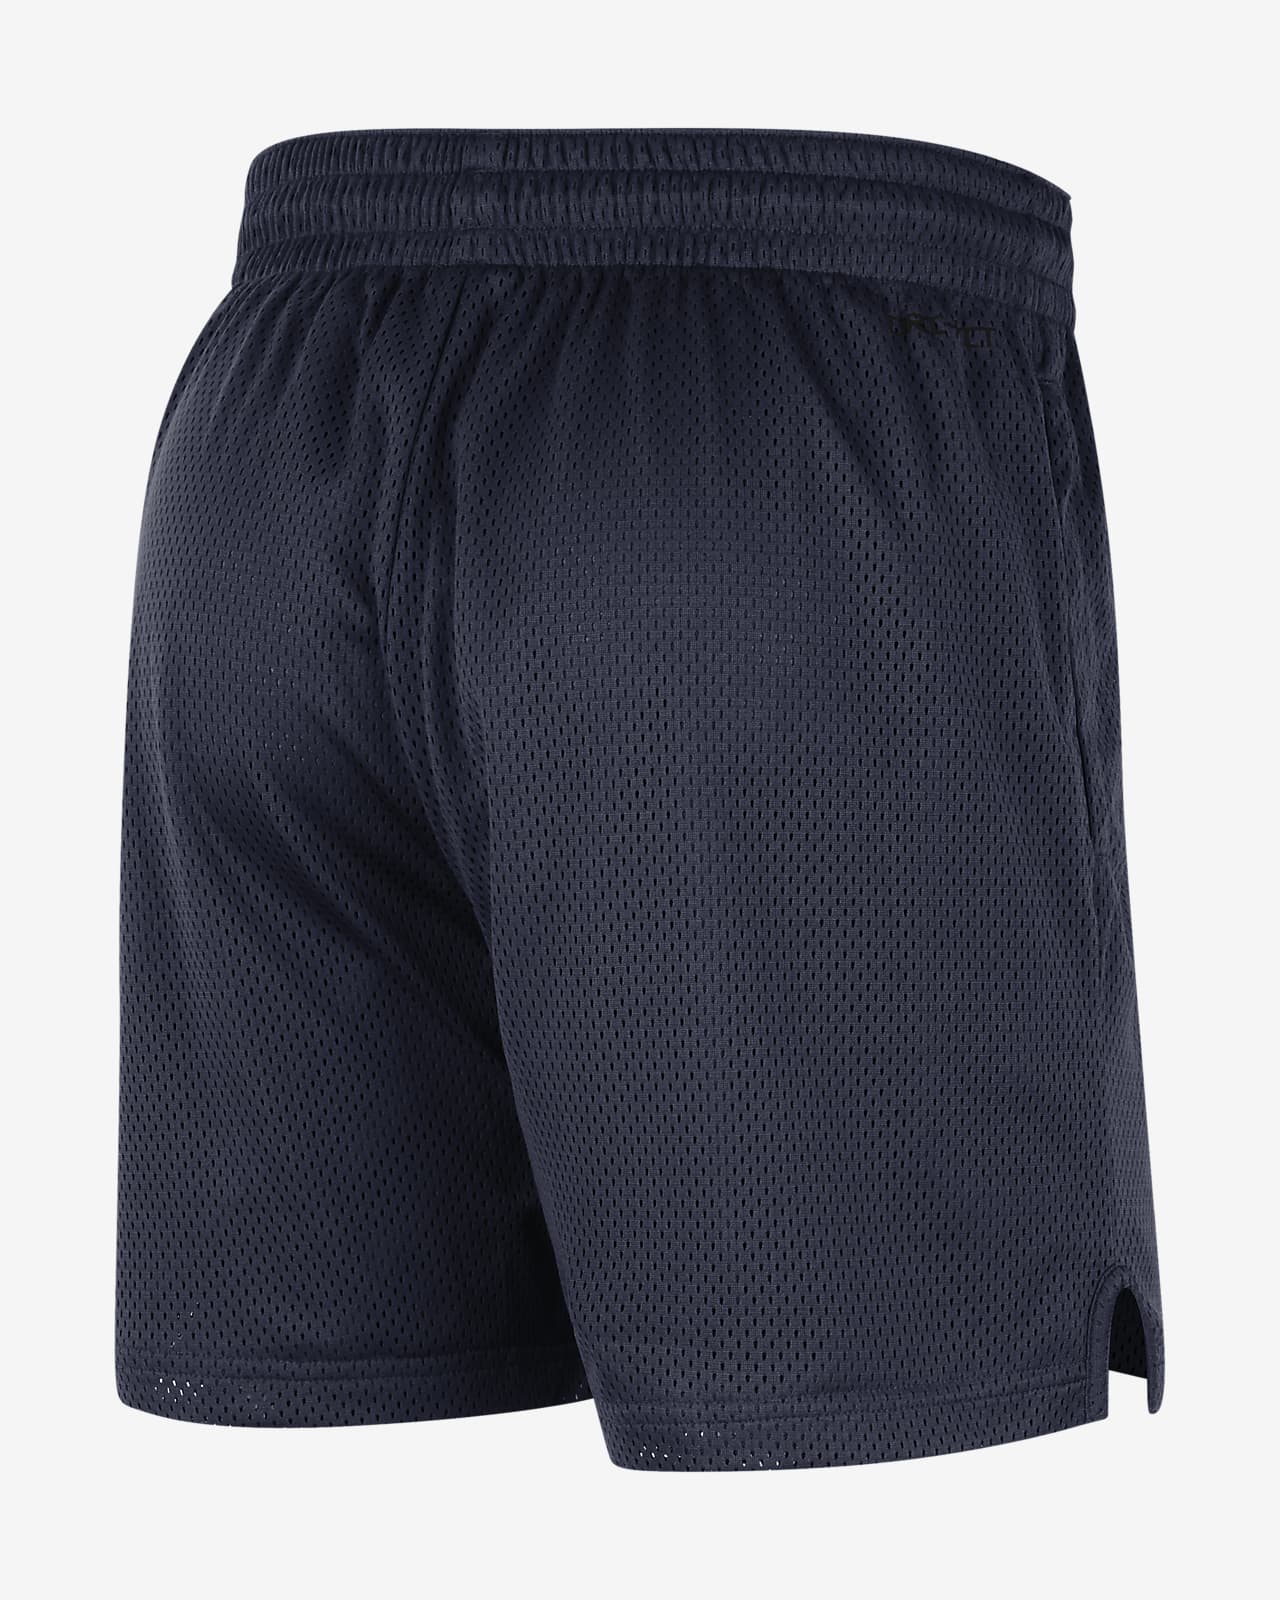 Nike and Cadre with Nike shorts. All Virginia sizes are Small and